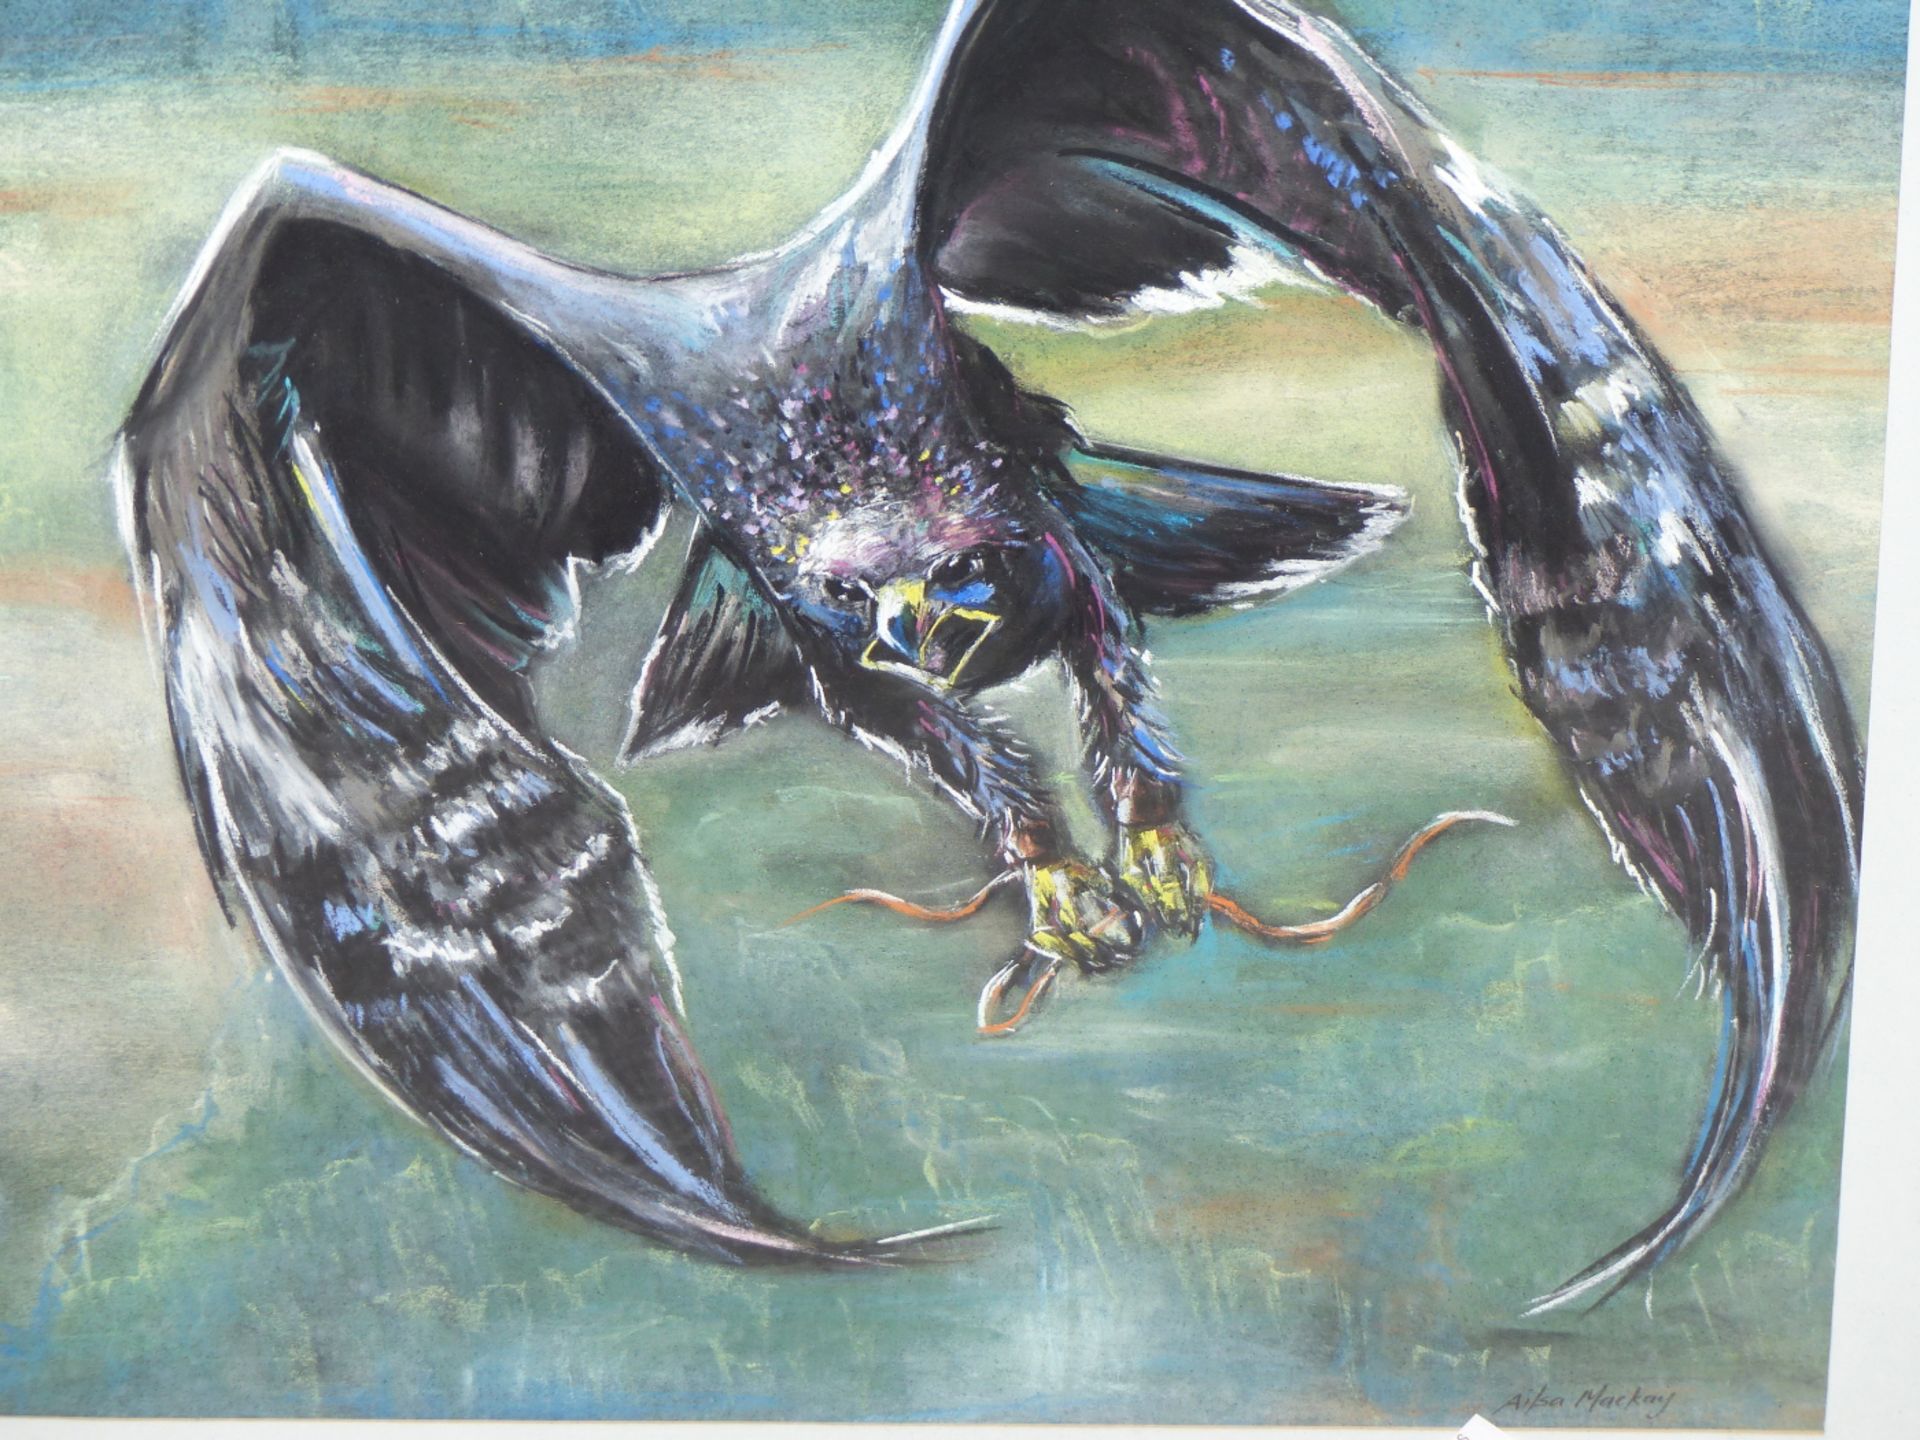 AILSA MACKAY (20TH / 21ST CENTURY) ARR. EAGLE IN FLIGHT WITH SNAKE. PASTEL. SIGNED L/R. 41 X 50 cm. - Image 5 of 6